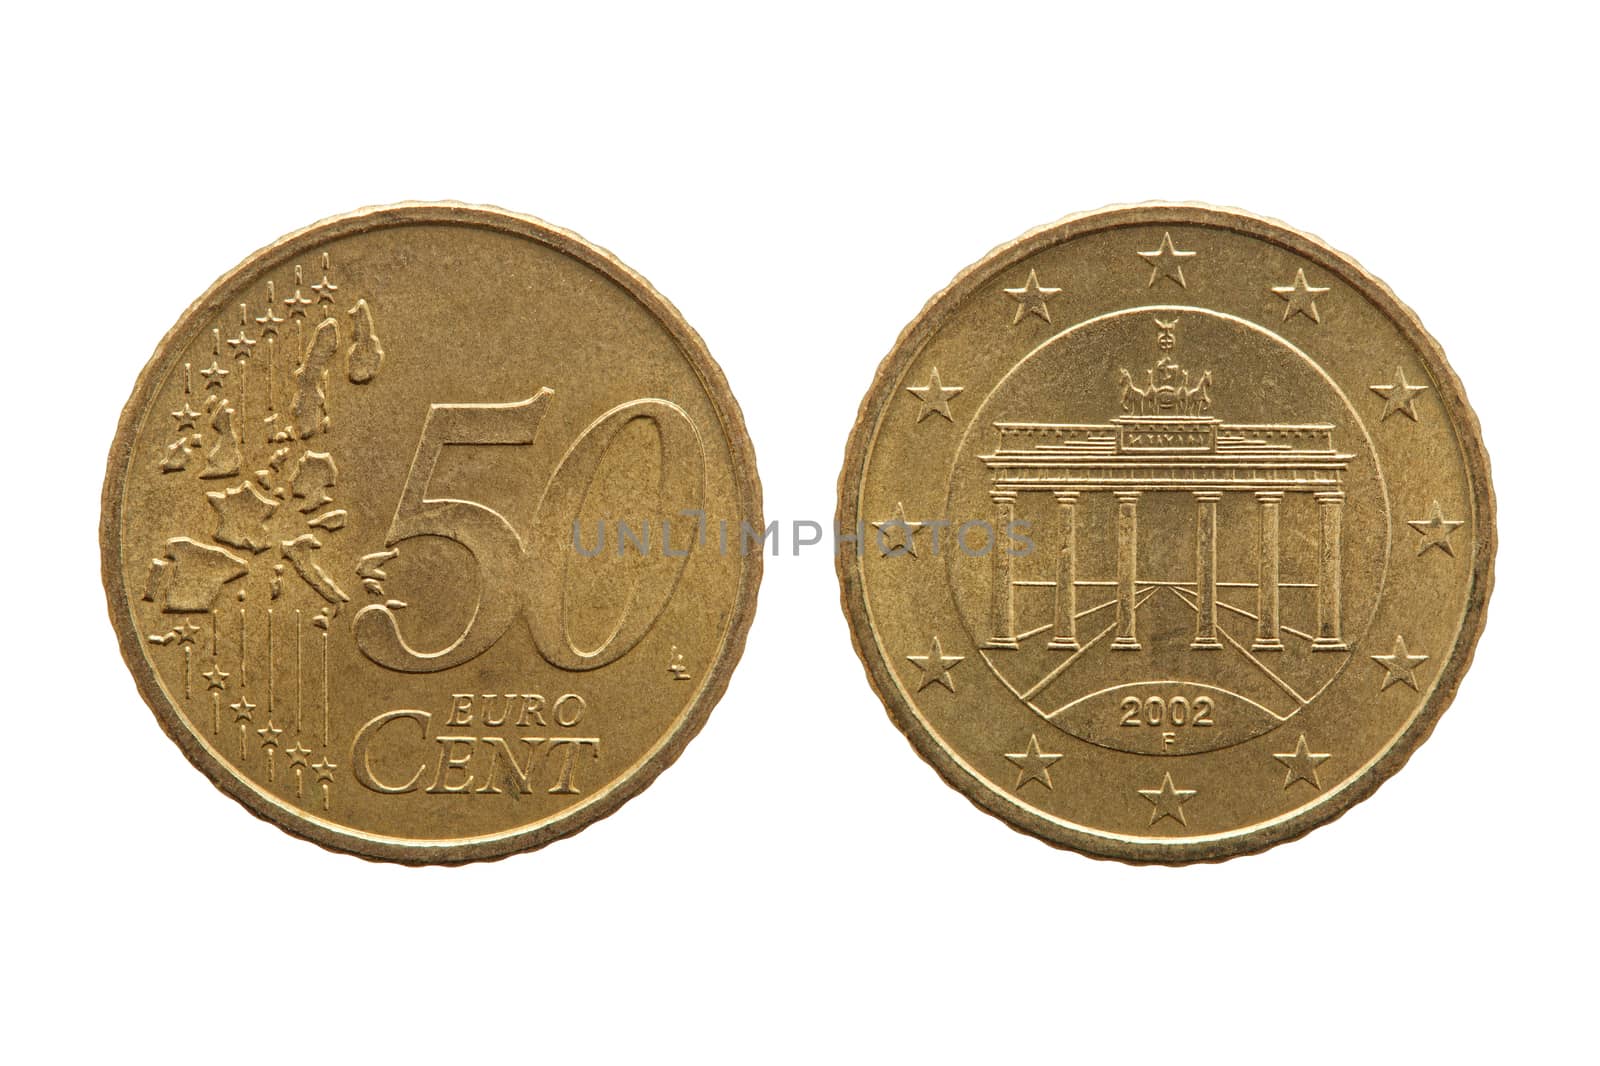 Fifty cent euro coin of Germany dated 2002 showing the Brandenburg Gate on the reverse cut out and isolated on a white background